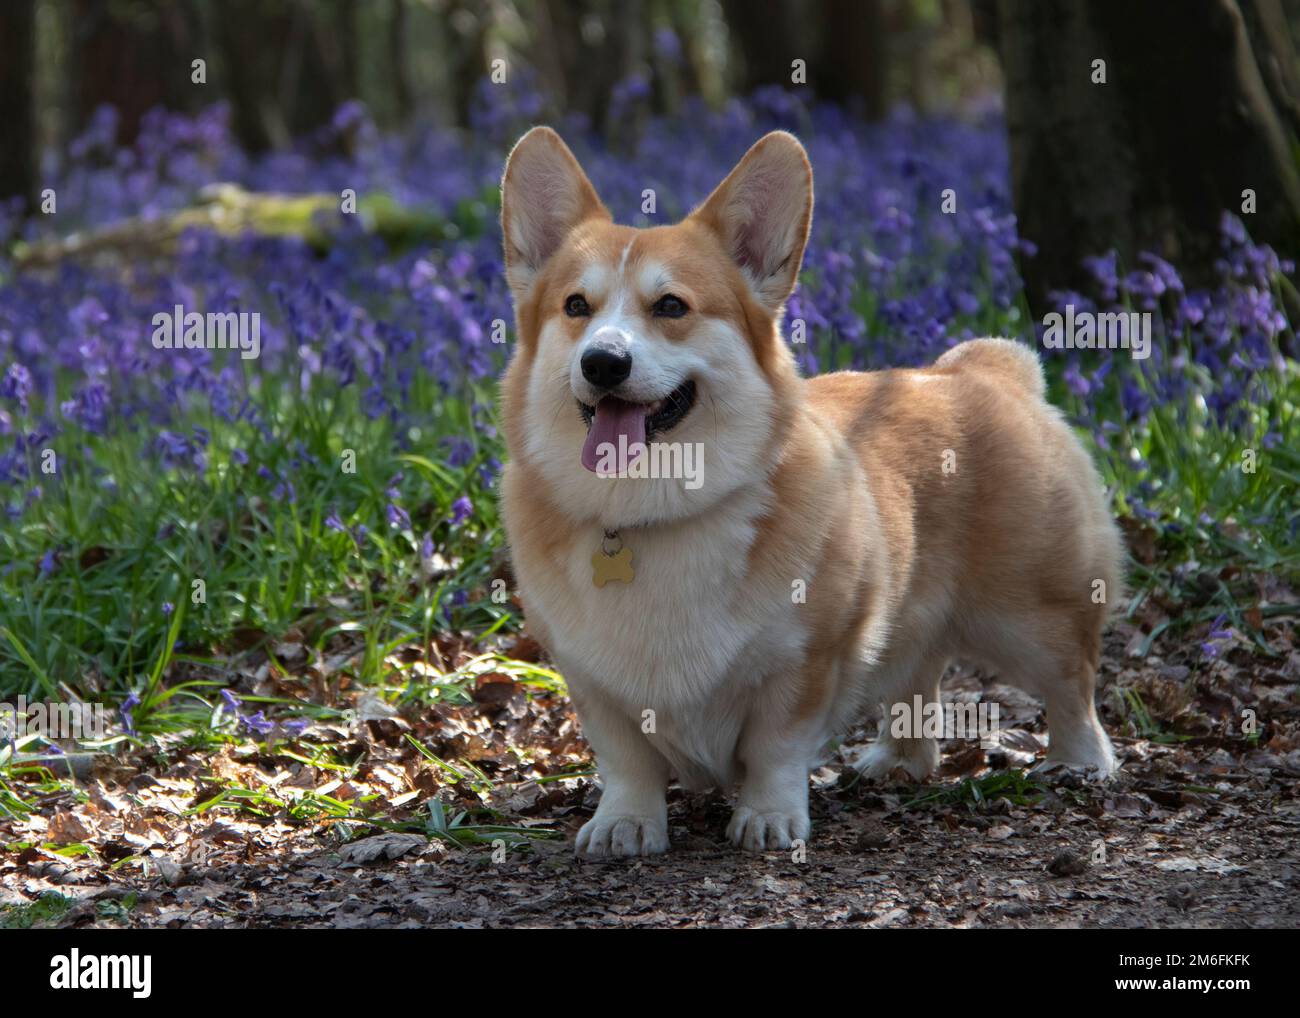 Pembroke Welsh Corgi Pedigree dog stands in field of bluebells in spring alert expression tongue out and with characteristic brown and white coat Stock Photo